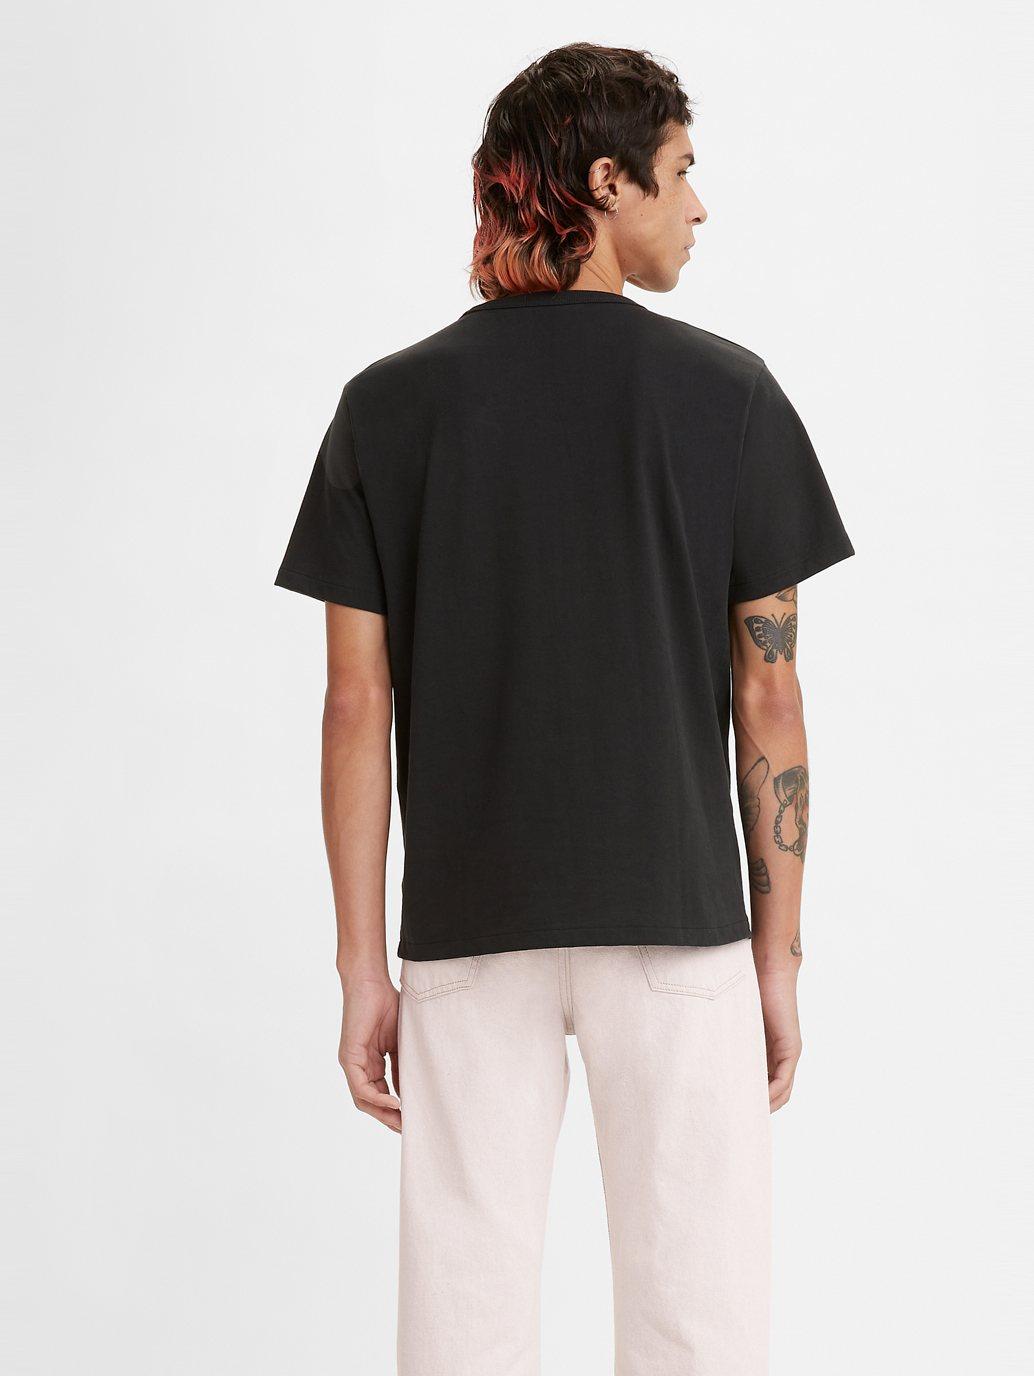 Buy Levi's® Made & Crafted® Men's Classic Tee | Levi's® HK Official ...